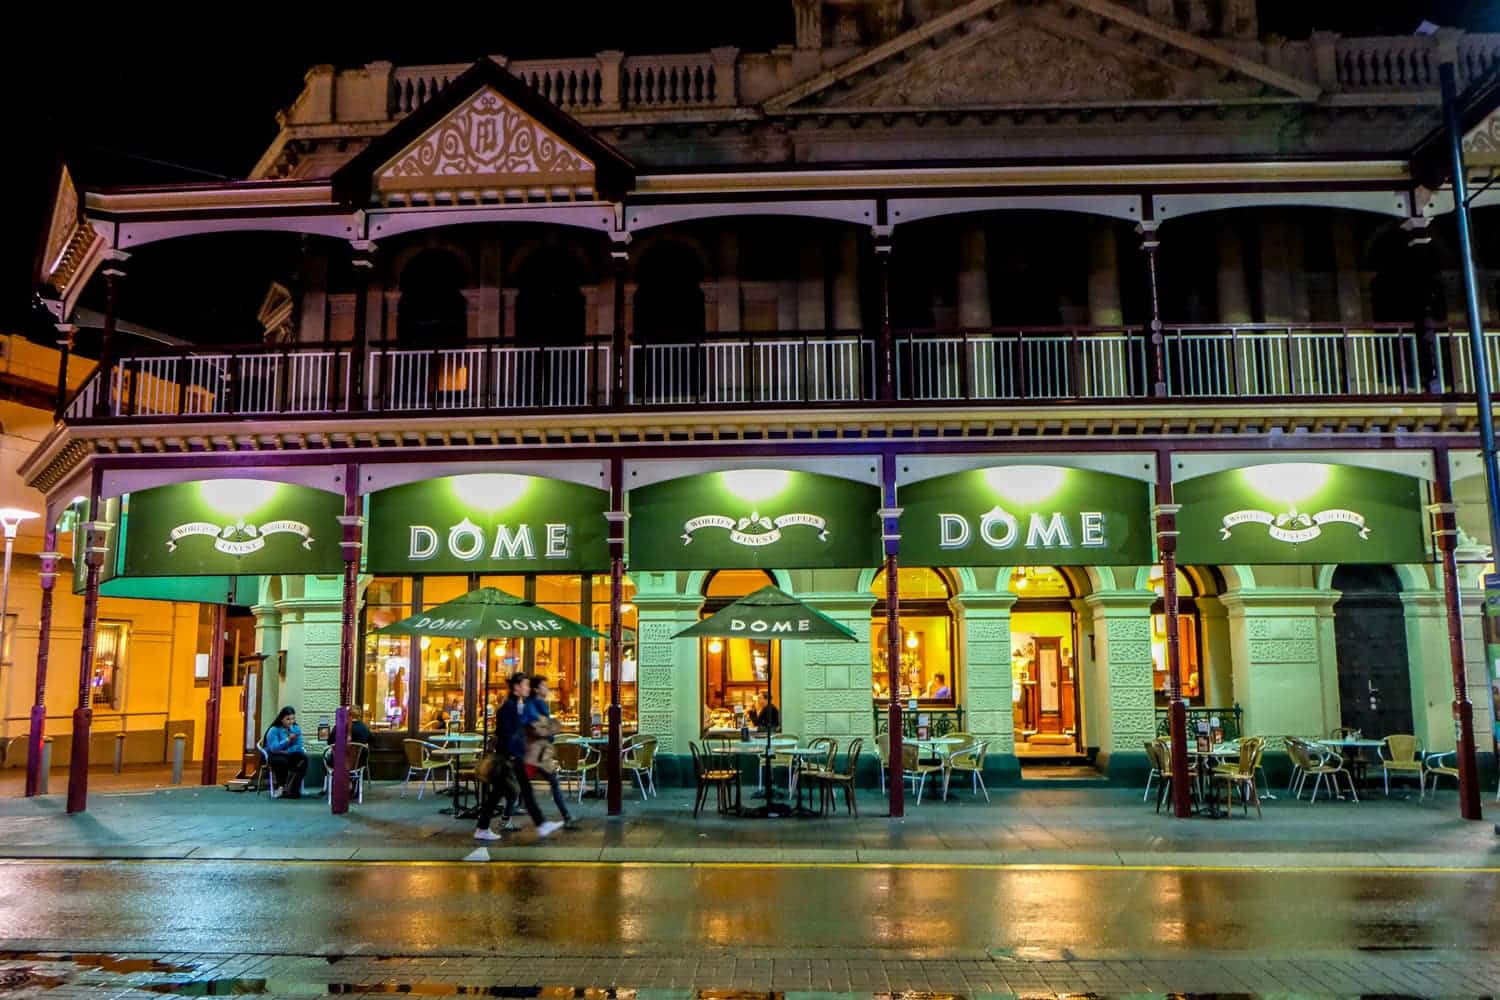 The green signage of the Dome coffee house in Freemantle, Perth at night